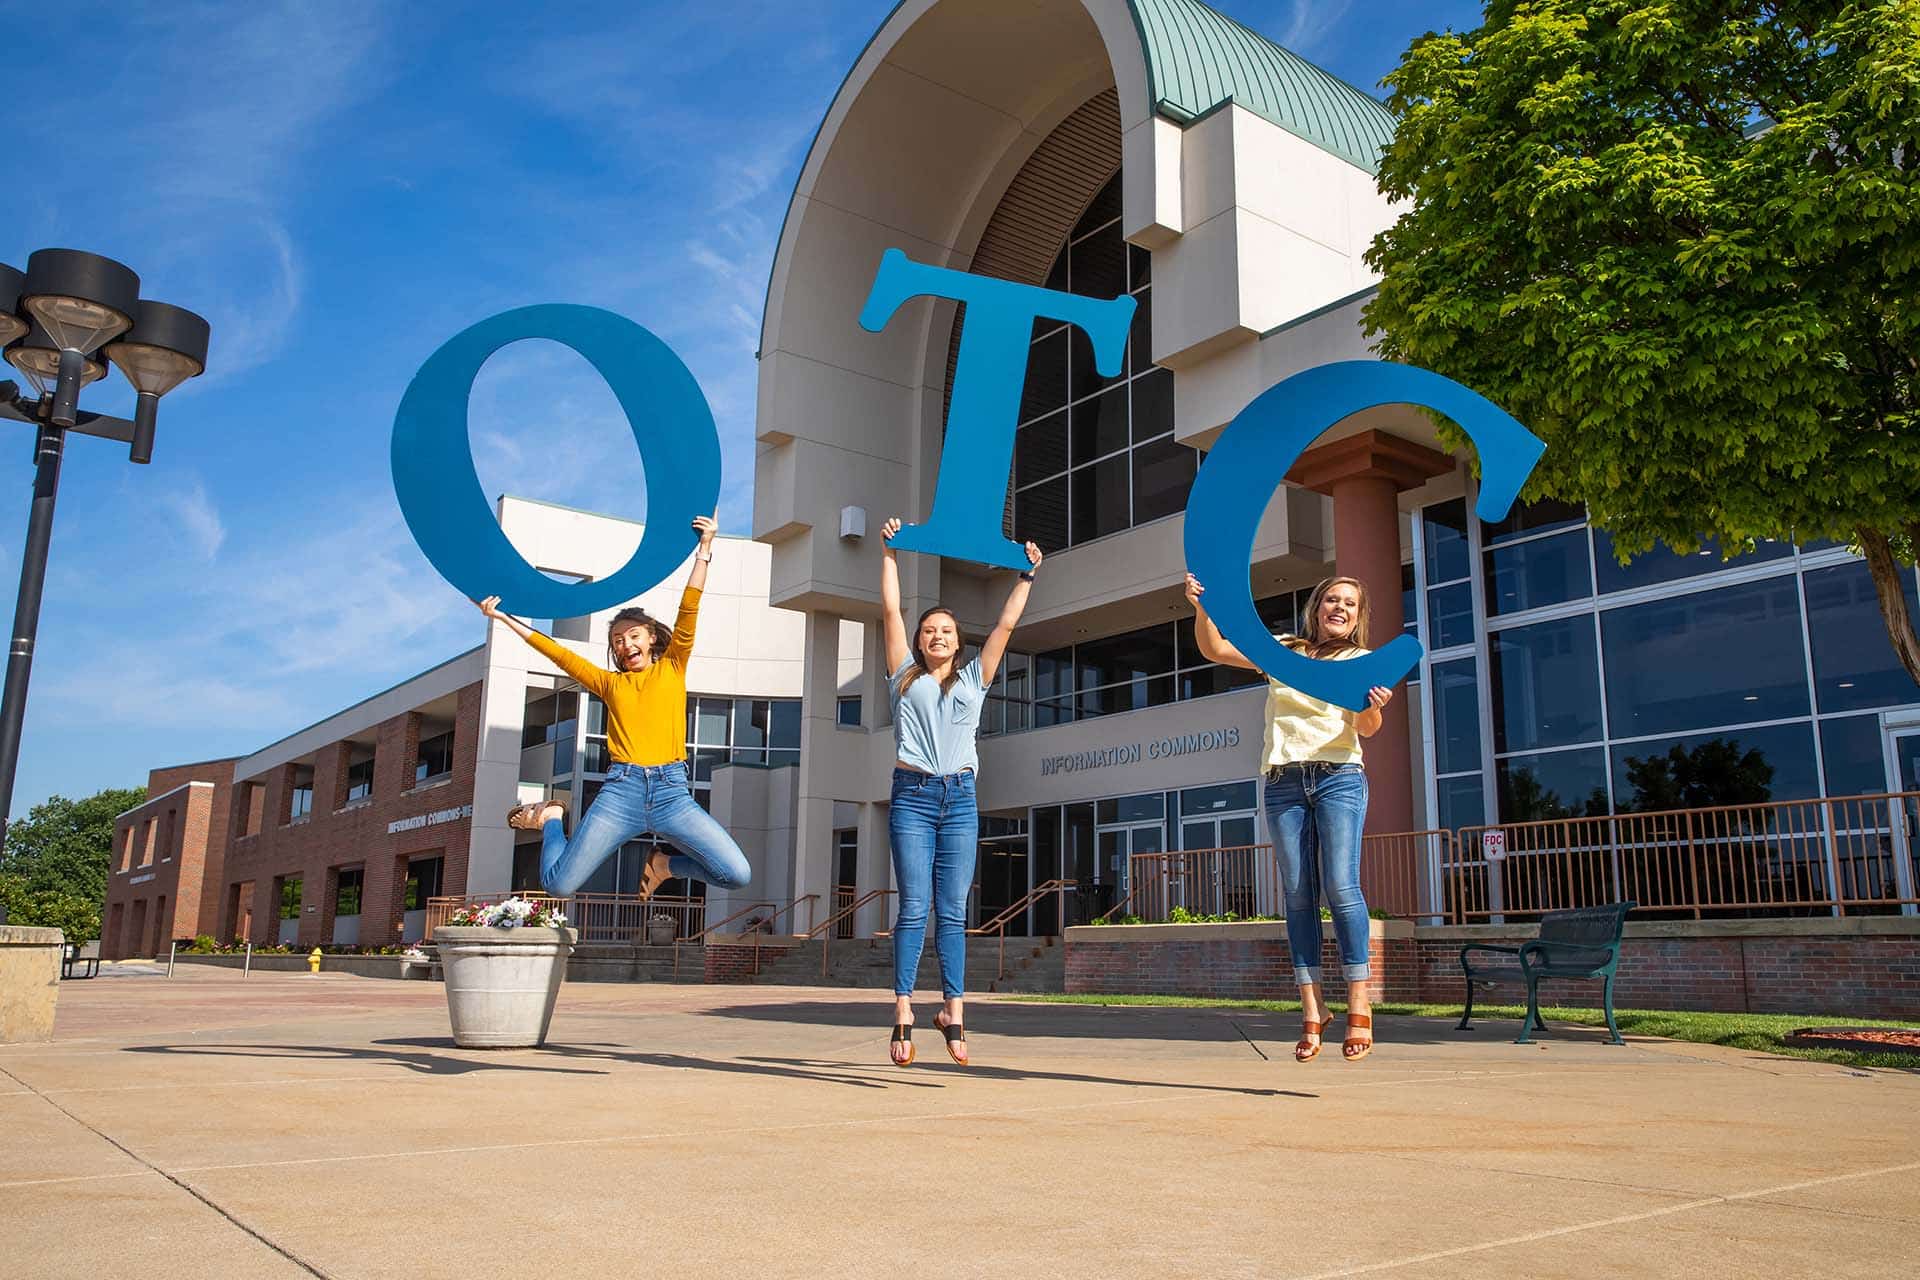 Students on campus of Ozarks Technical Community College.